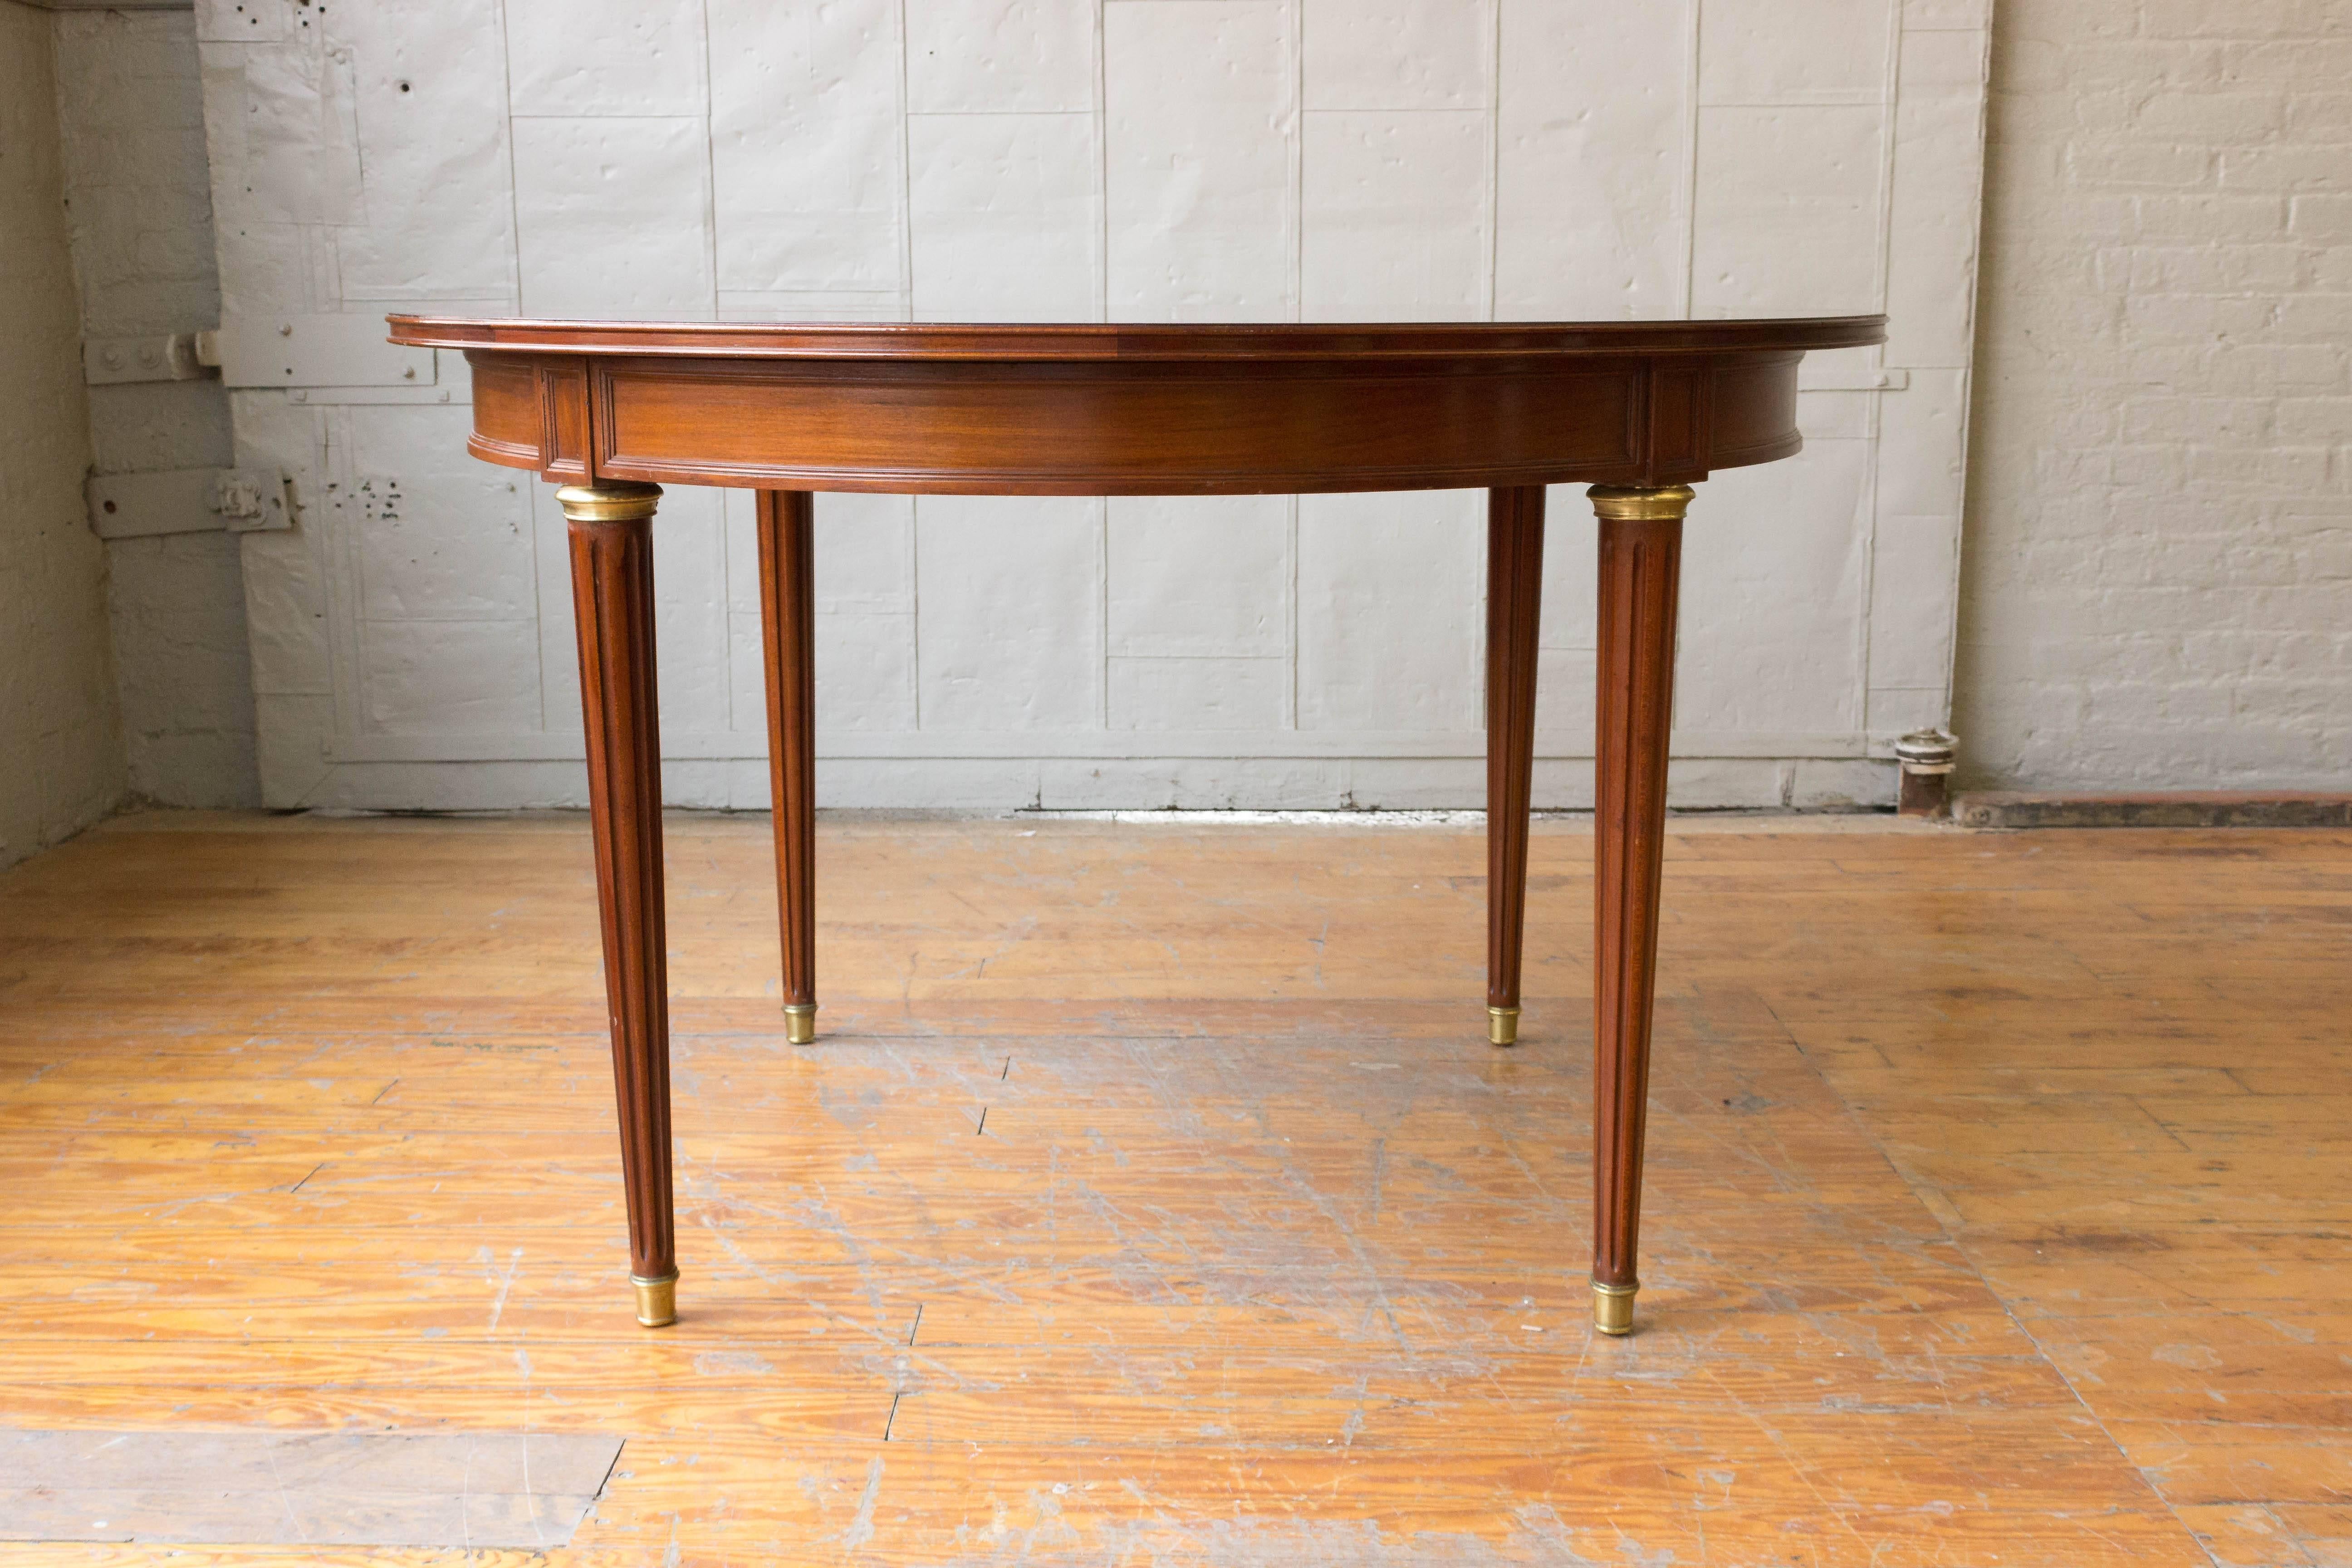 French 1940s mahogany oval dining table with tapered legs with brass sabots. Table sold with two leaves (19.75